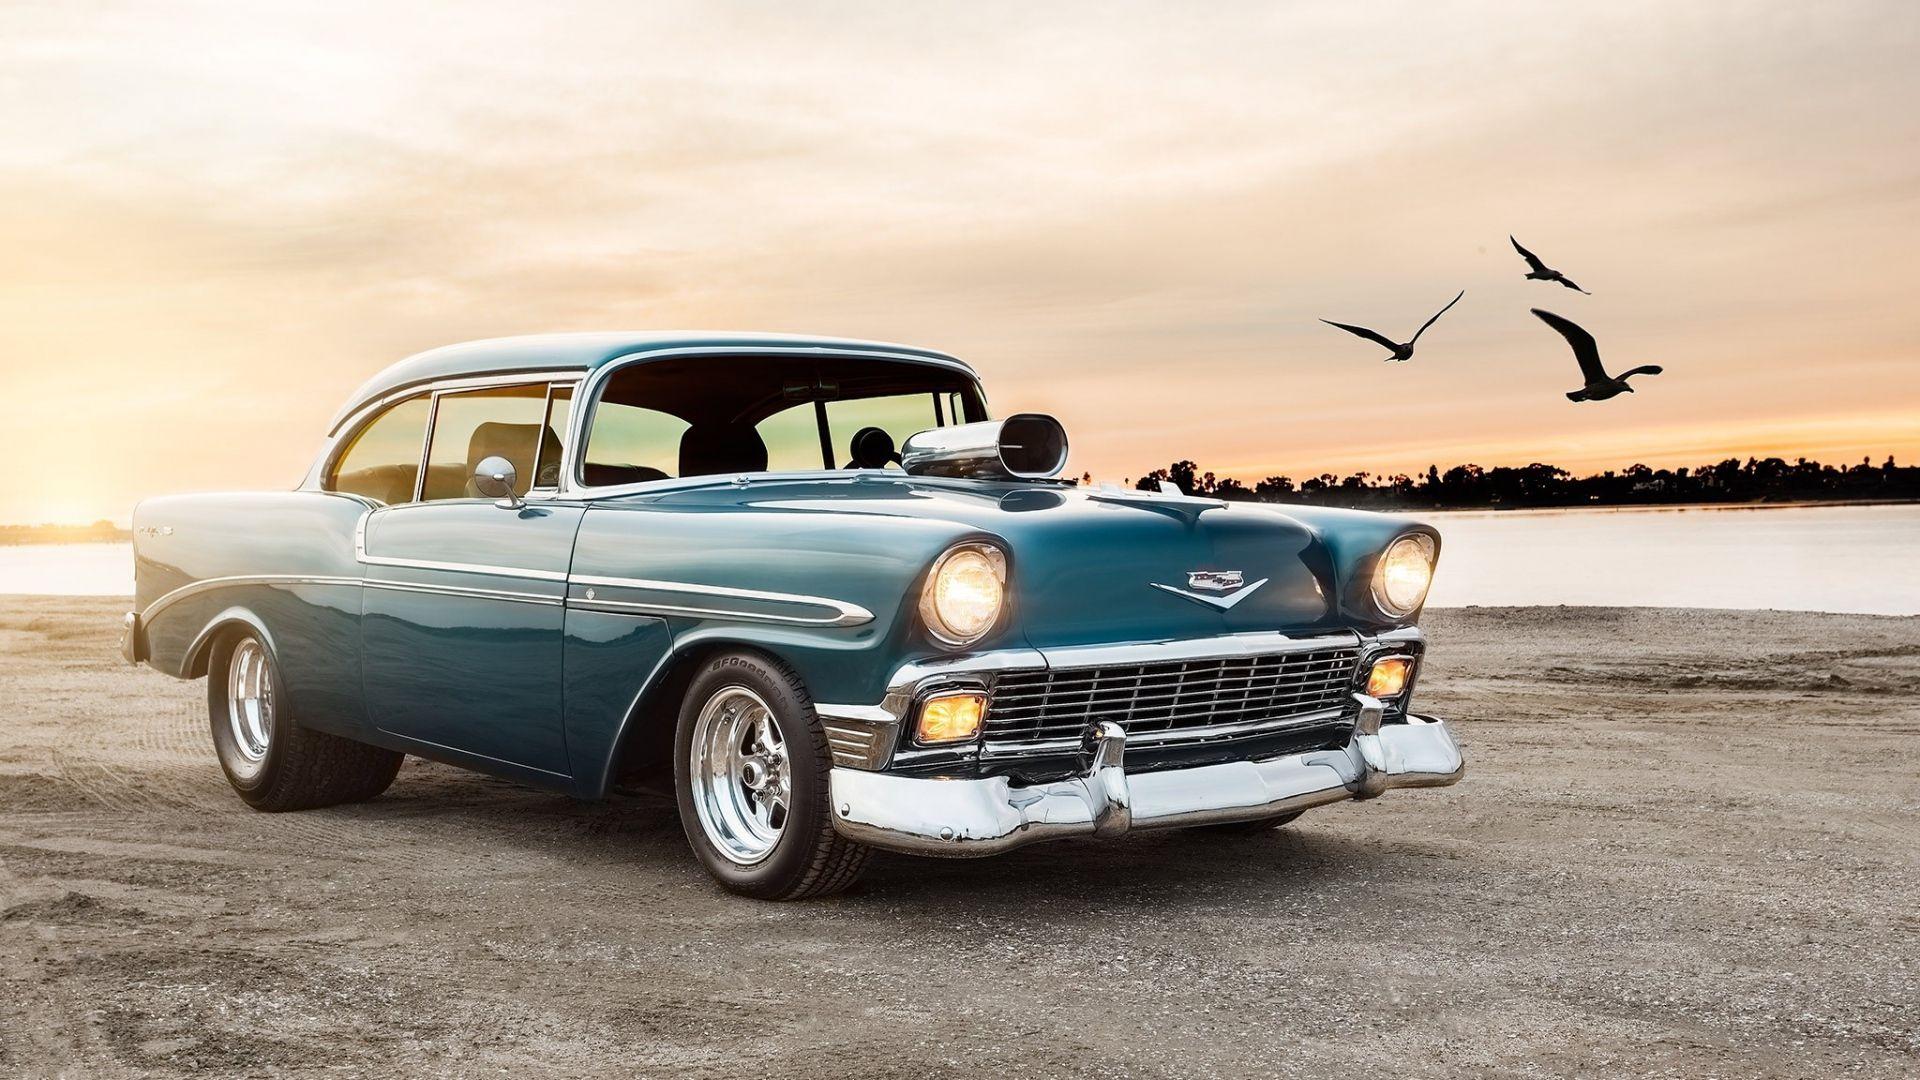 Old classic chevrolet wallpapers